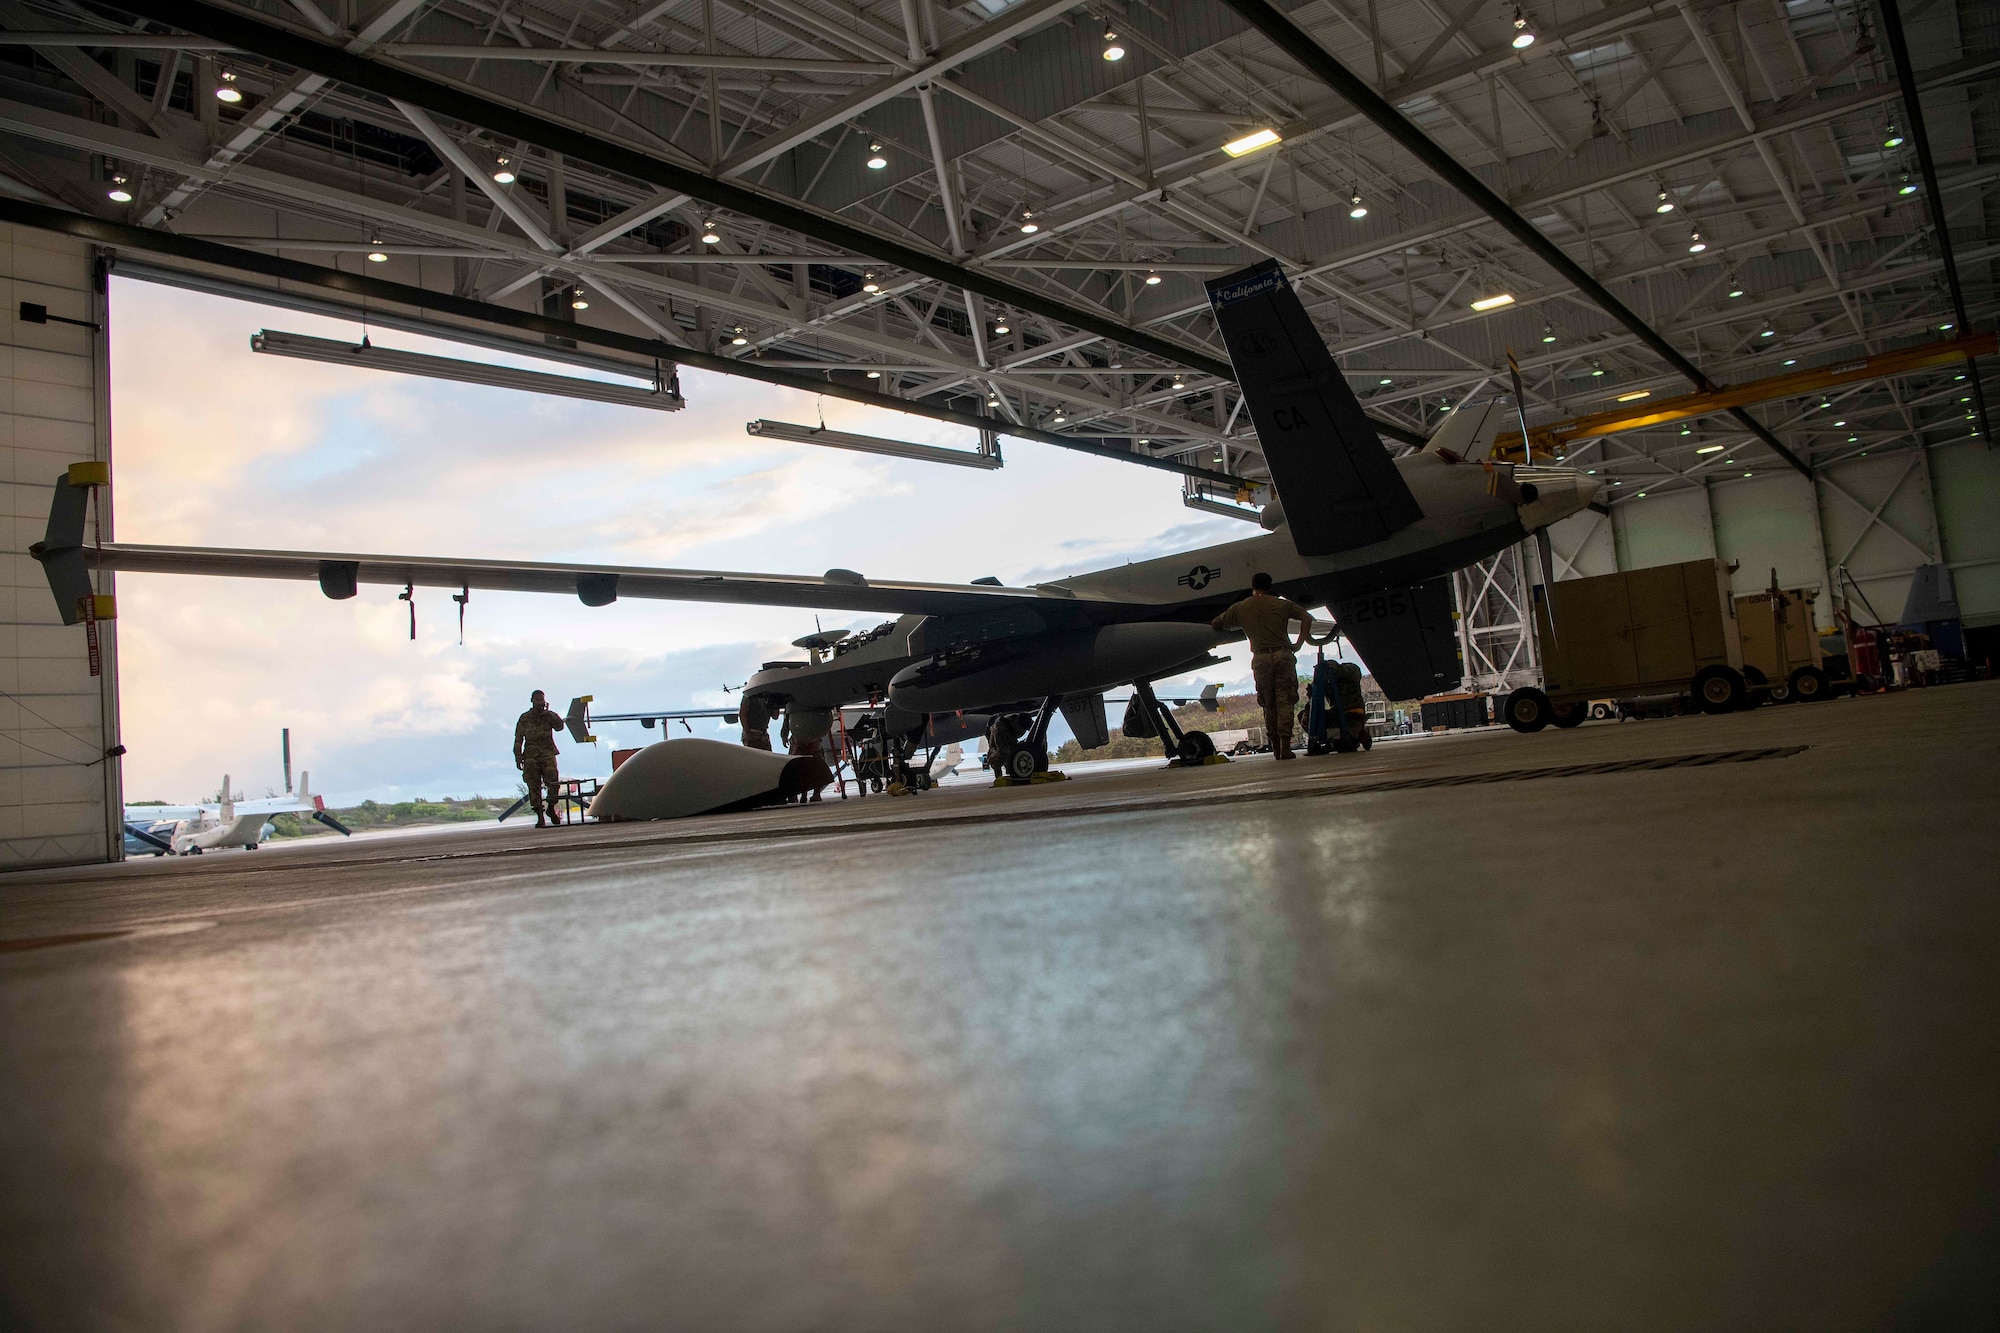 MARINE CORPS AIR STATION, KANEOHE BAY, Hawaii (July 25, 2022) U.S. Air Force Airmen conduct maintenance on an MQ-9 Reaper assigned to the 163rd Wing at March Air Reserve Base, Calif., during Rim of the Pacific (RIMPAC) 2022, July 25, at Marine Corps Air Station Kaneohe Bay, Hawaii.